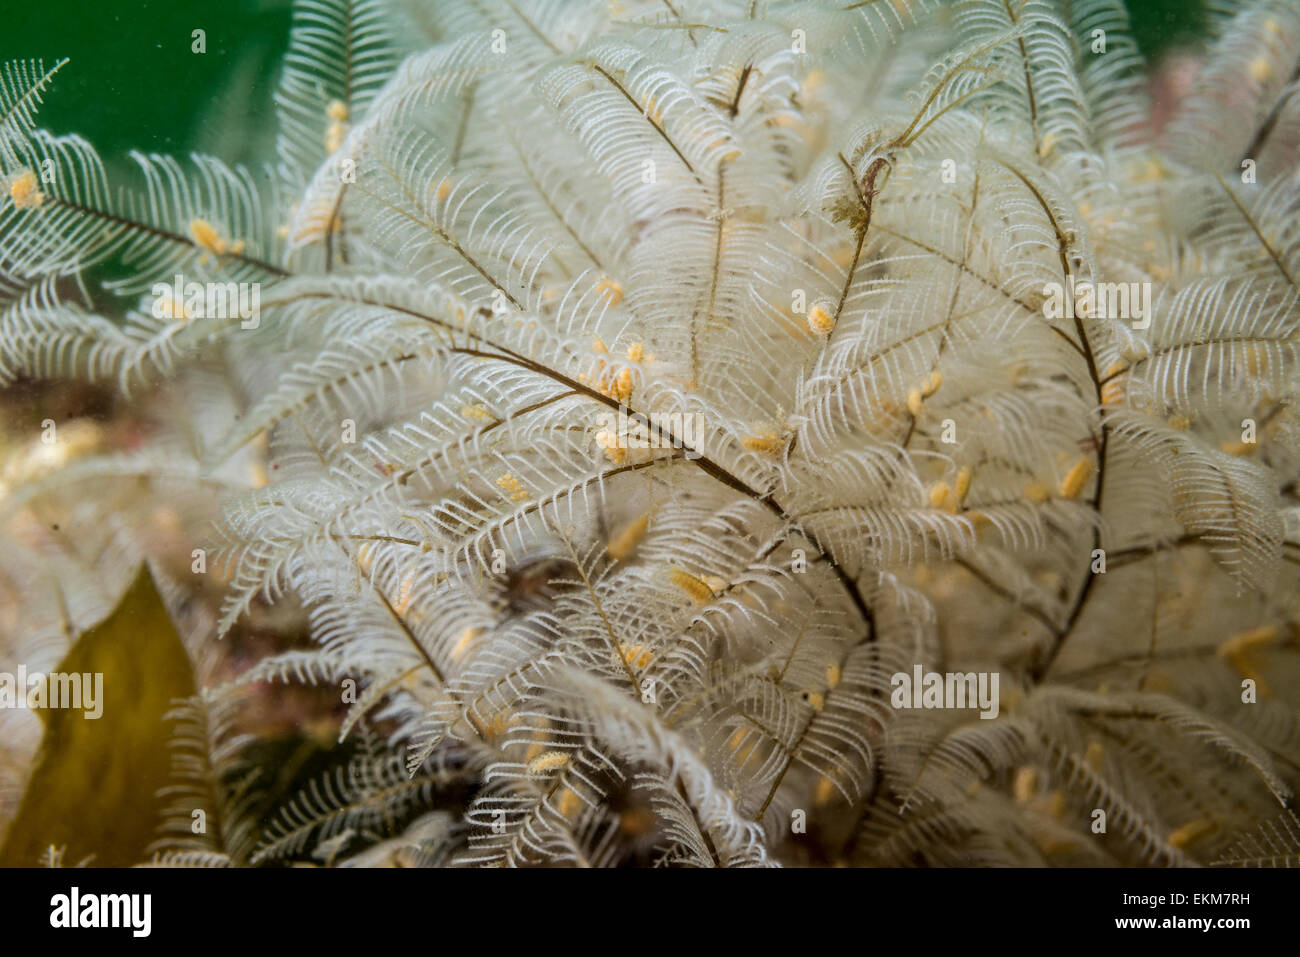 Fire hydroid, commonly encountered on shallows. They have painful stings. Owase, Mie, Japan. Stock Photo